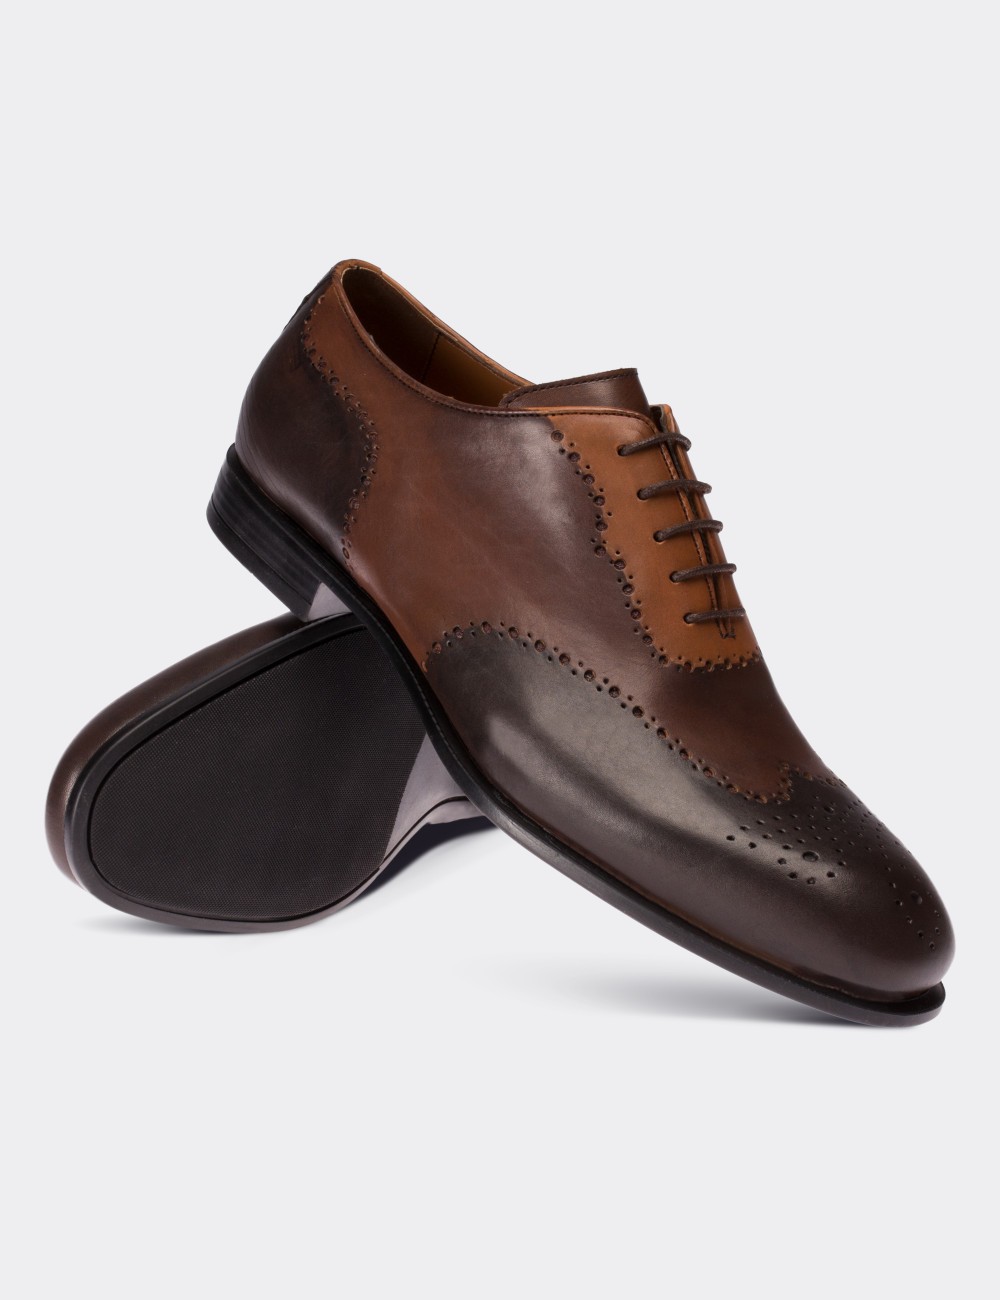 Brown Calfskin Leather Classic Shoes - Deery